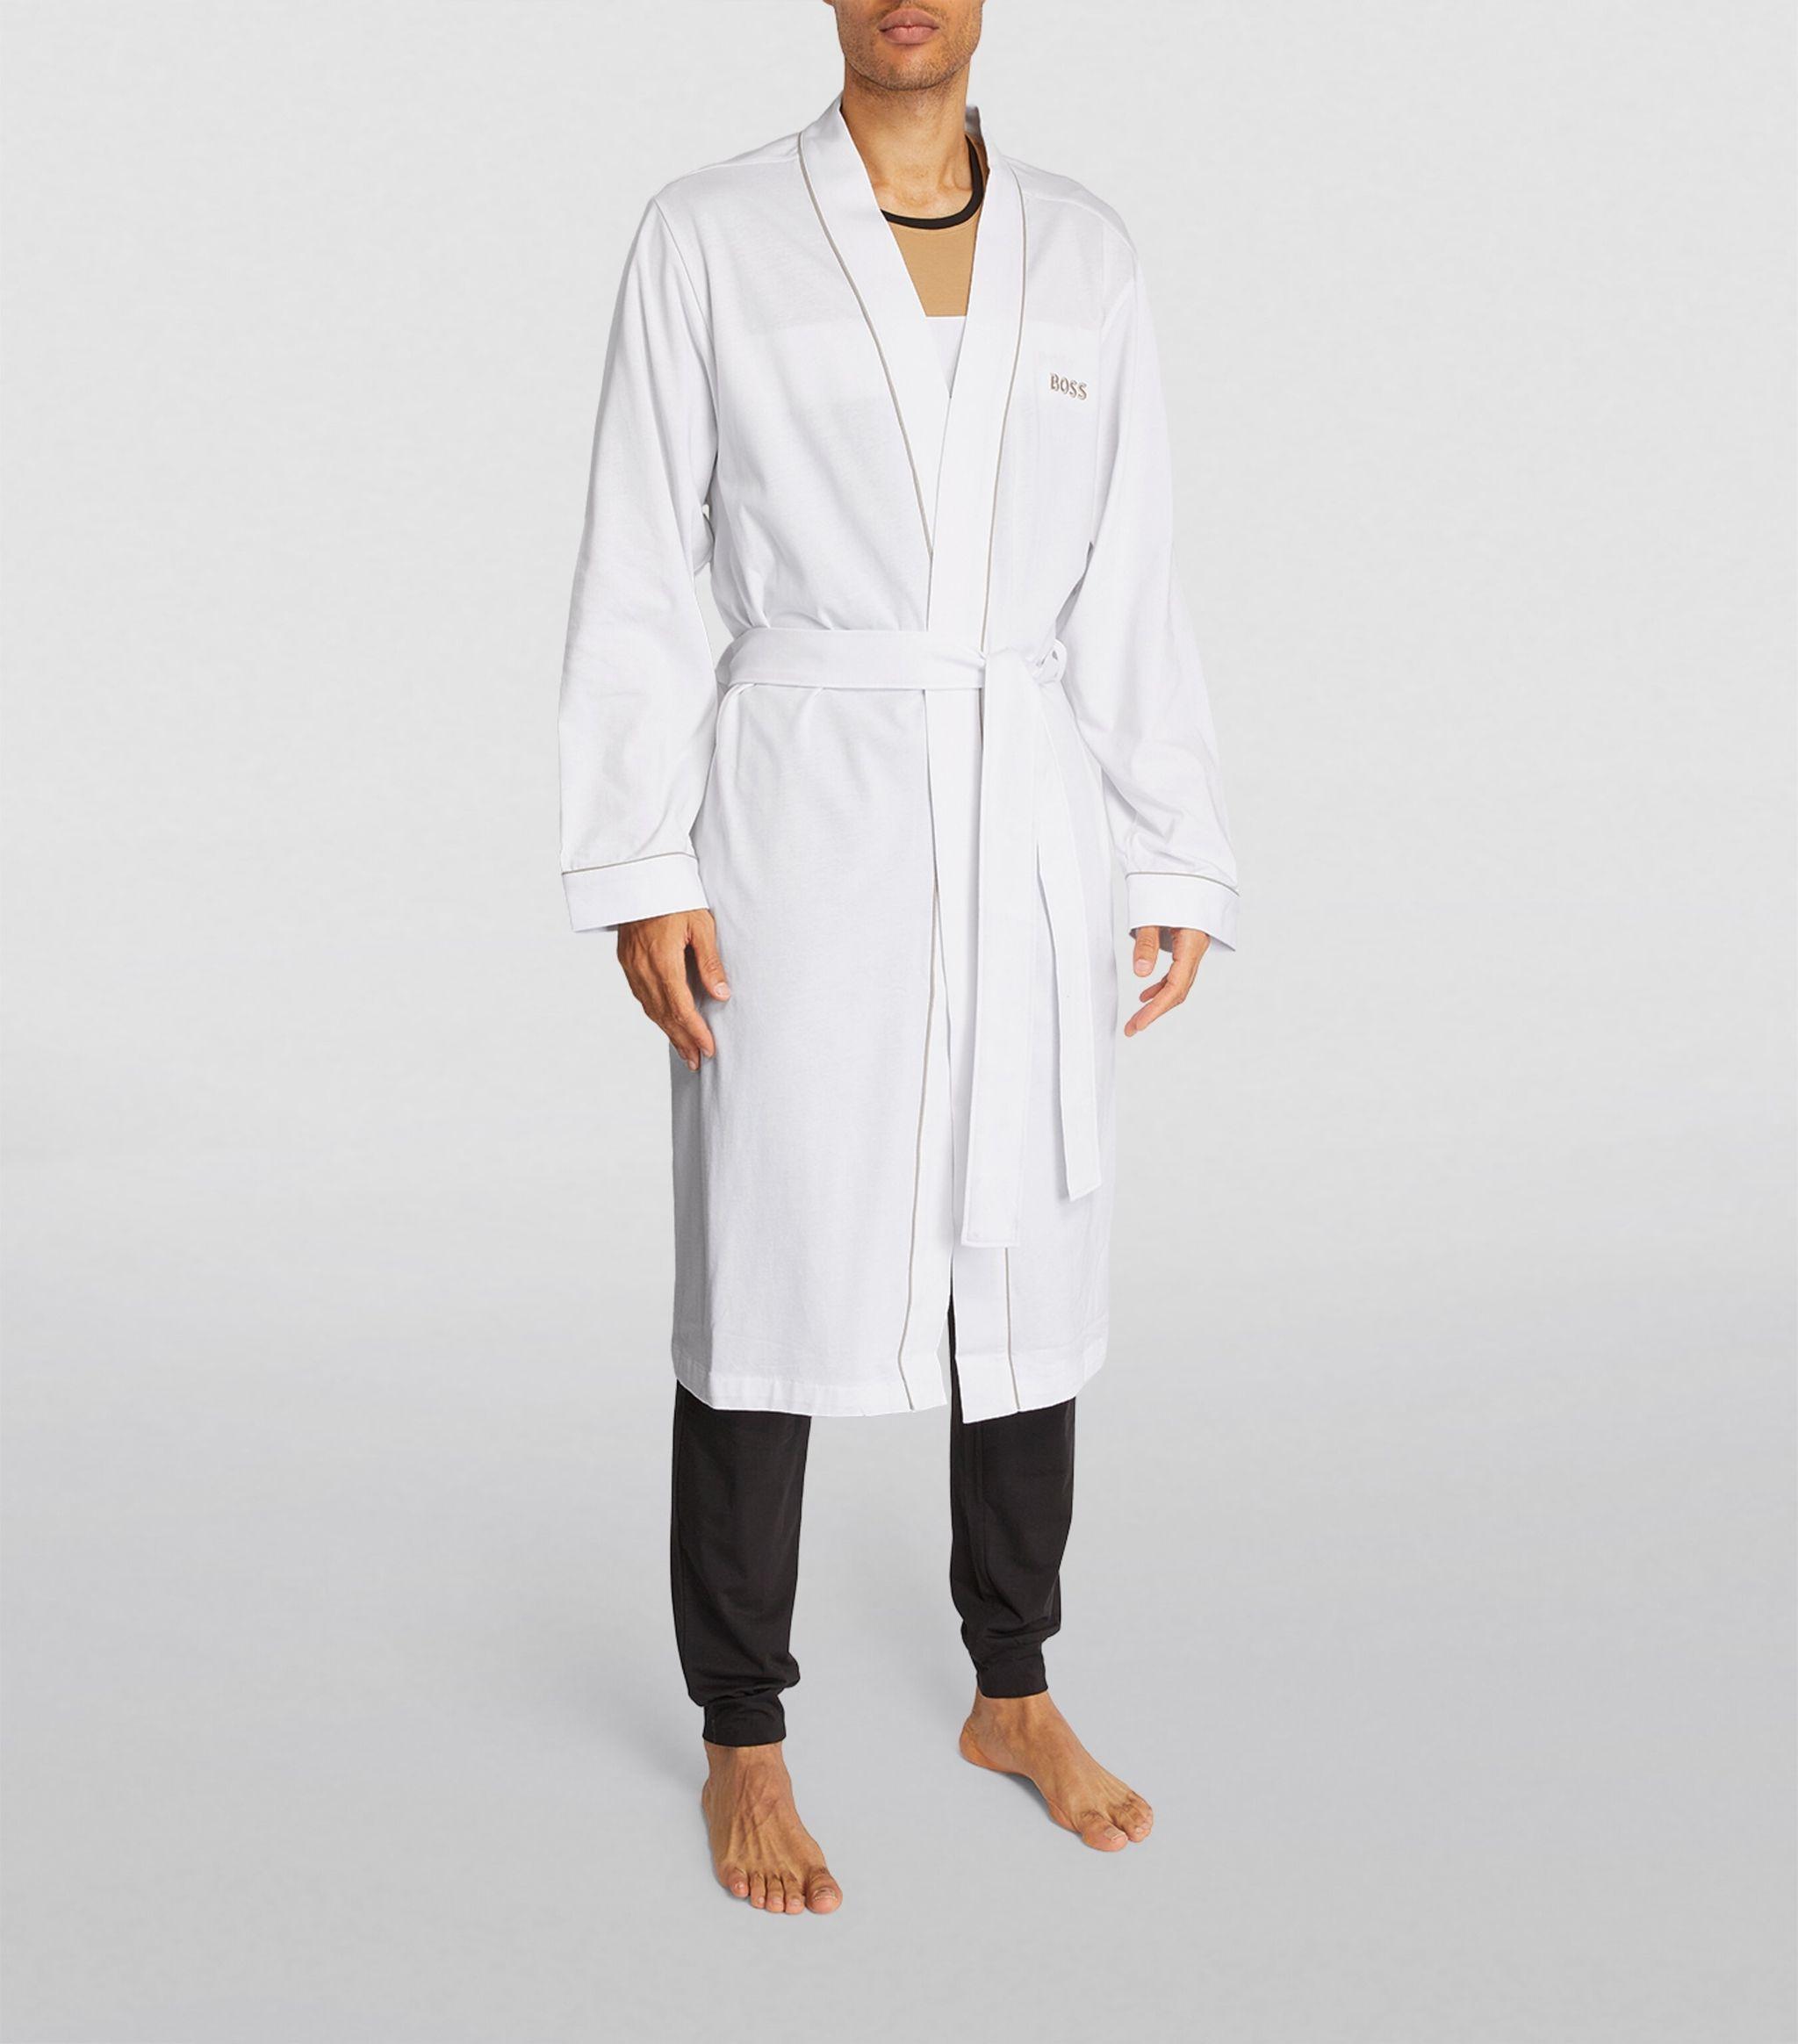 BOSS by HUGO BOSS Cotton Piped Robe in White for Men | Lyst